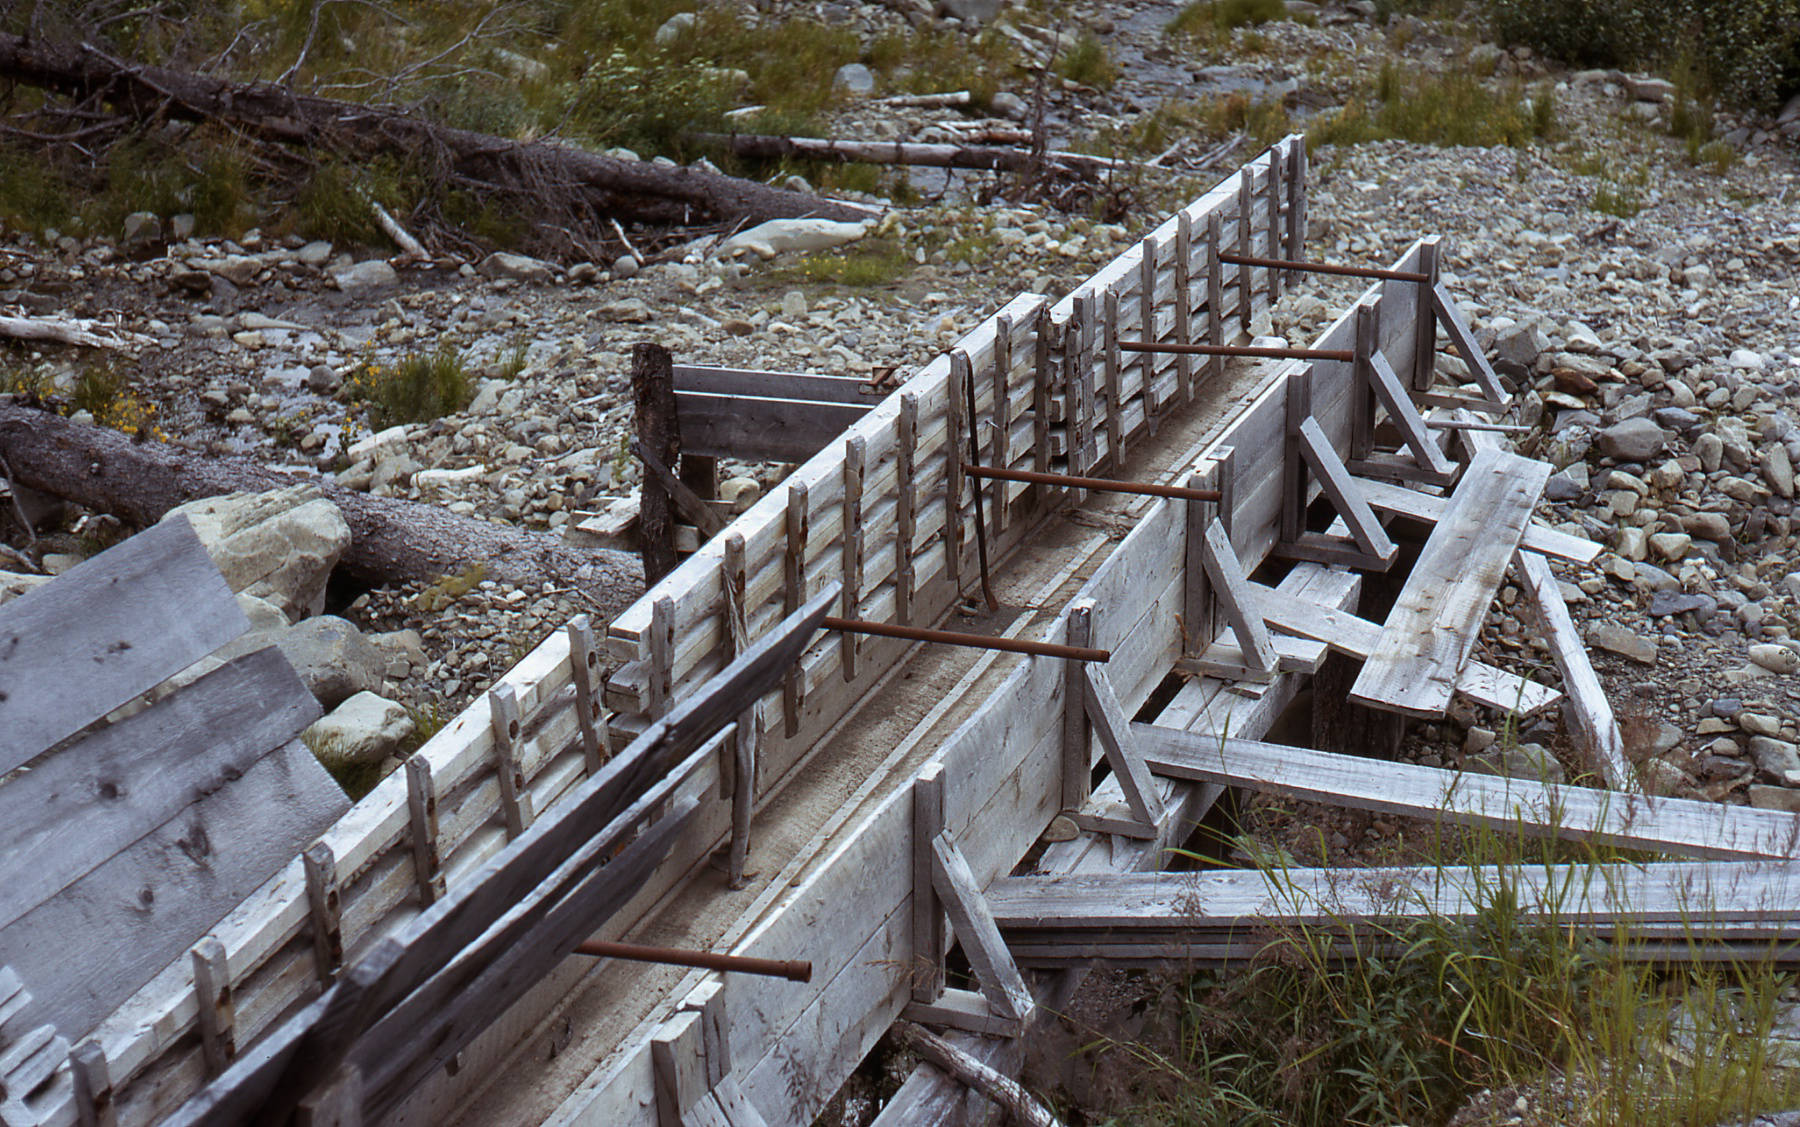 A Surprise Creek sluice box still in place in 1967. (Photo from the Fair Family Collection)